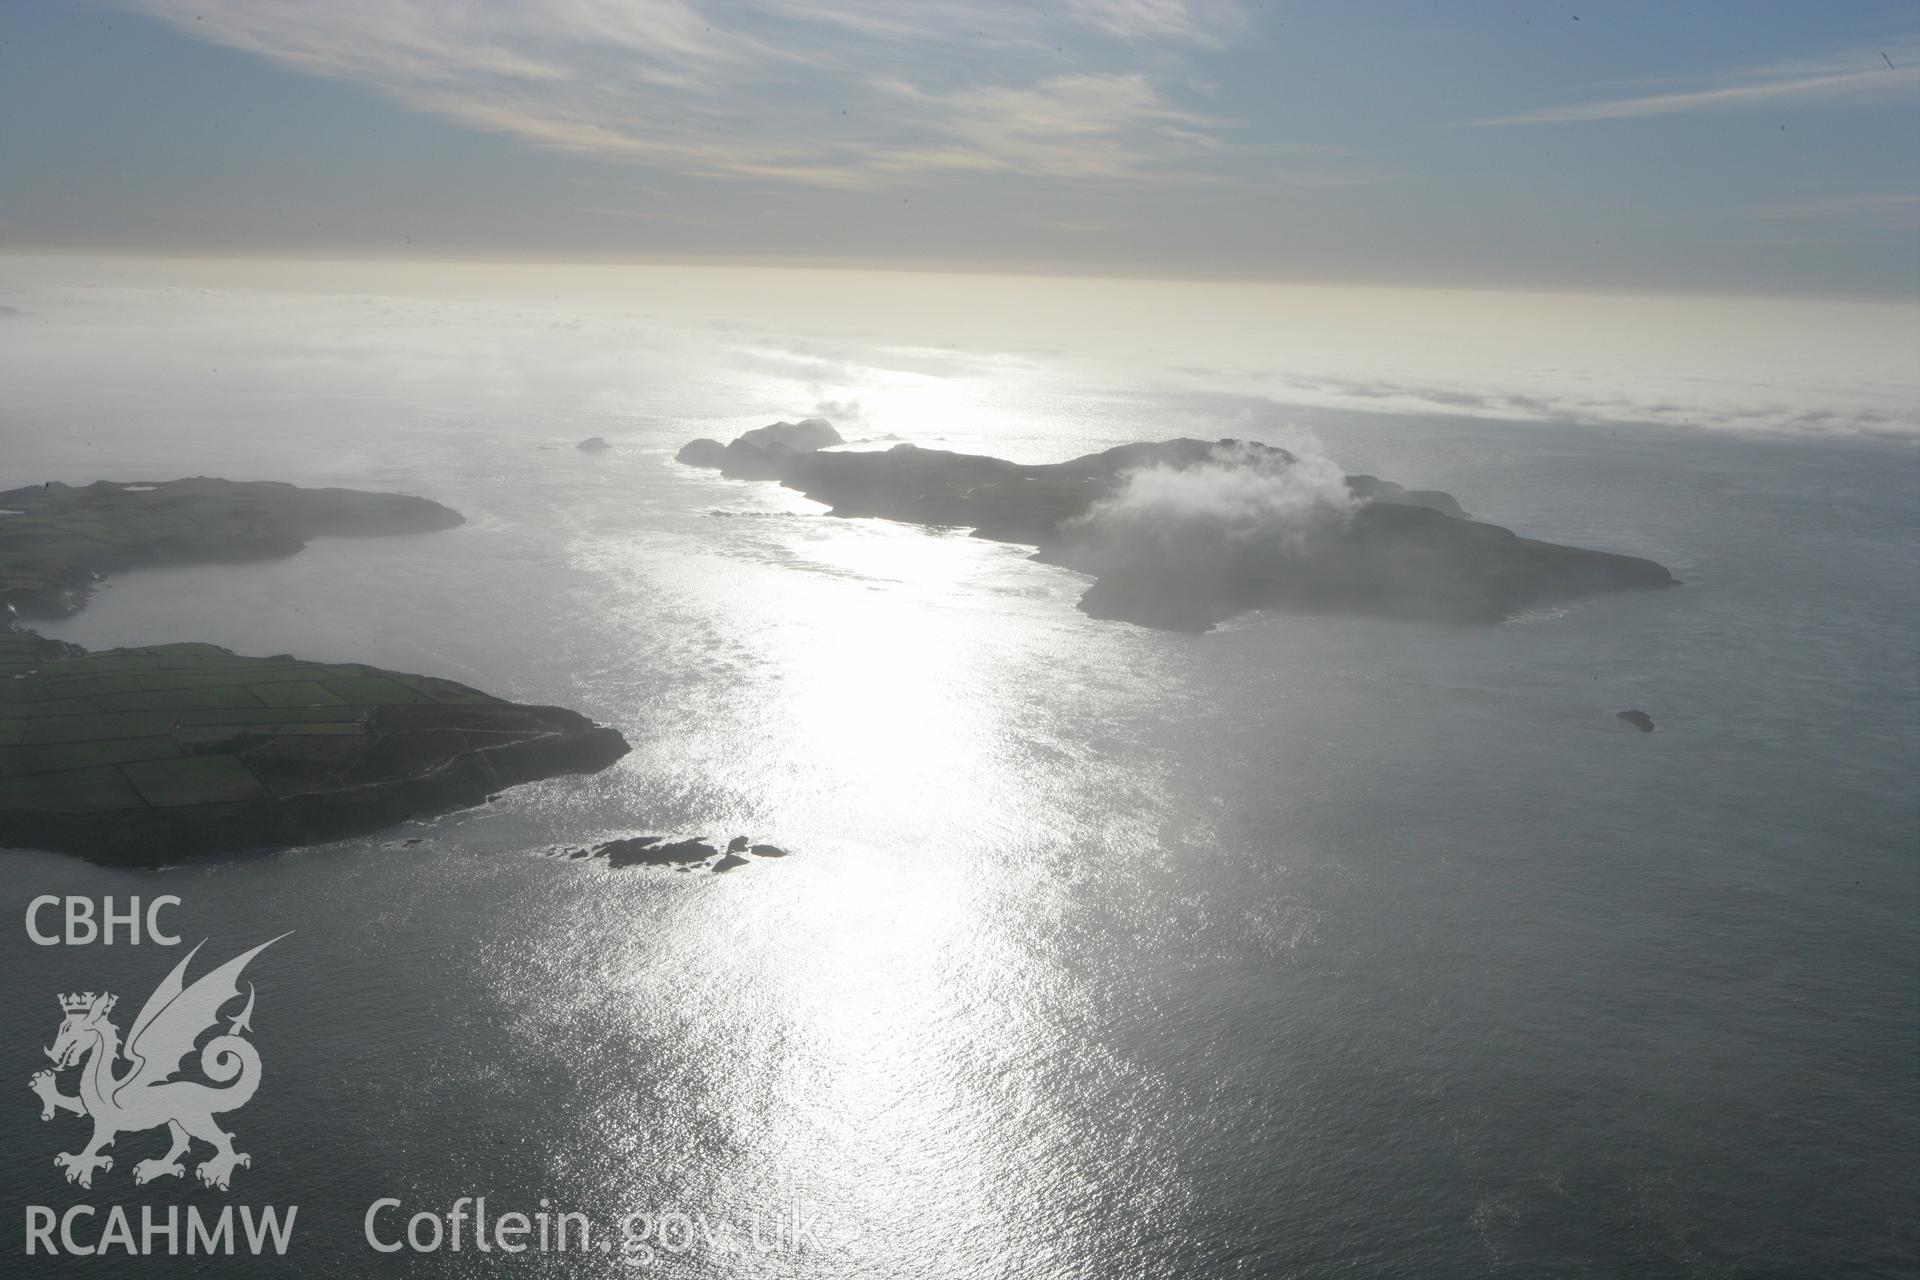 RCAHMW colour oblique aerial photograph of Ramsey Island. Taken on 28 January 2009 by Toby Driver